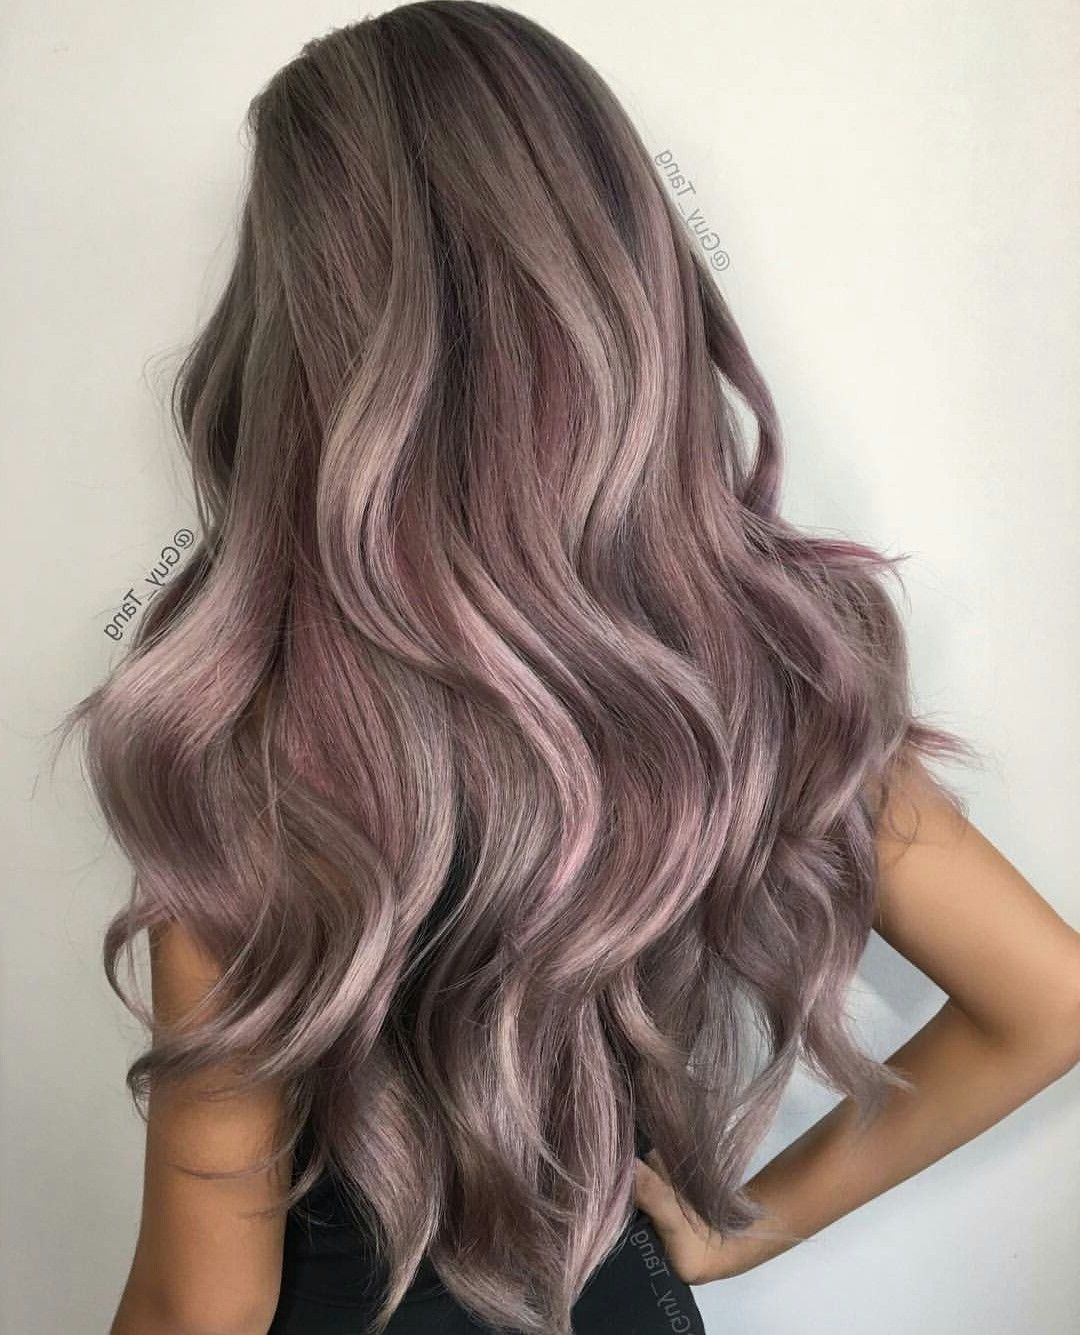 30 Modern Asian Hairstyles For Women And Girls In 2019 Within Famous Ravishing Smoky Purple Ombre Hairstyles (View 14 of 20)